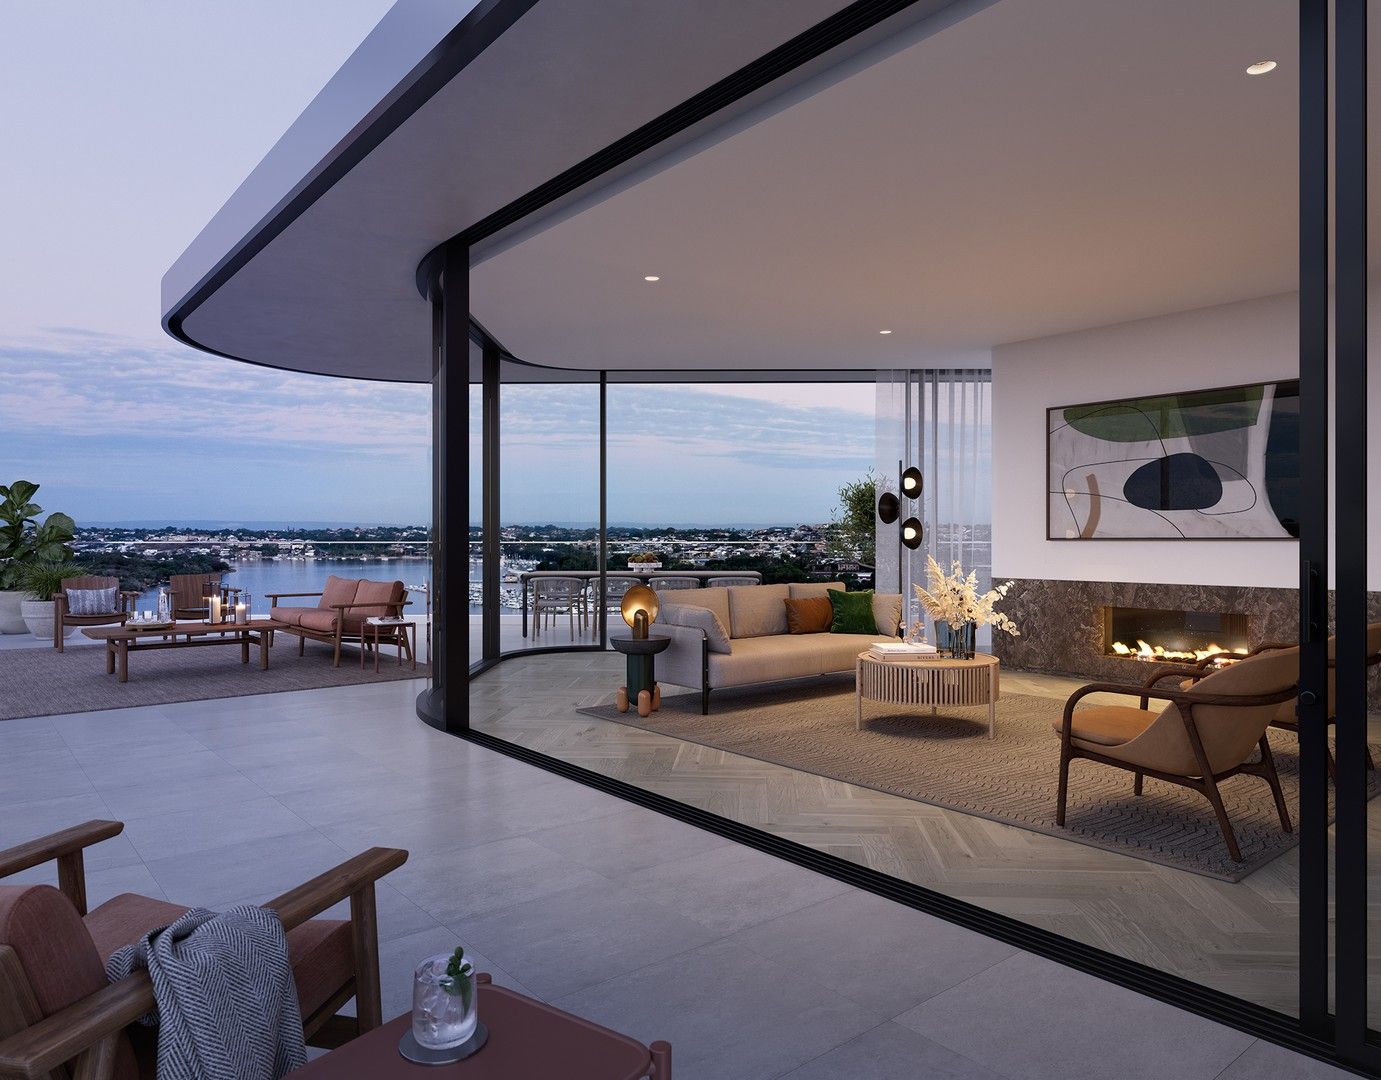 4 bedrooms New Apartments / Off the Plan in 2601/21 McCabe Street NORTH FREMANTLE WA, 6159